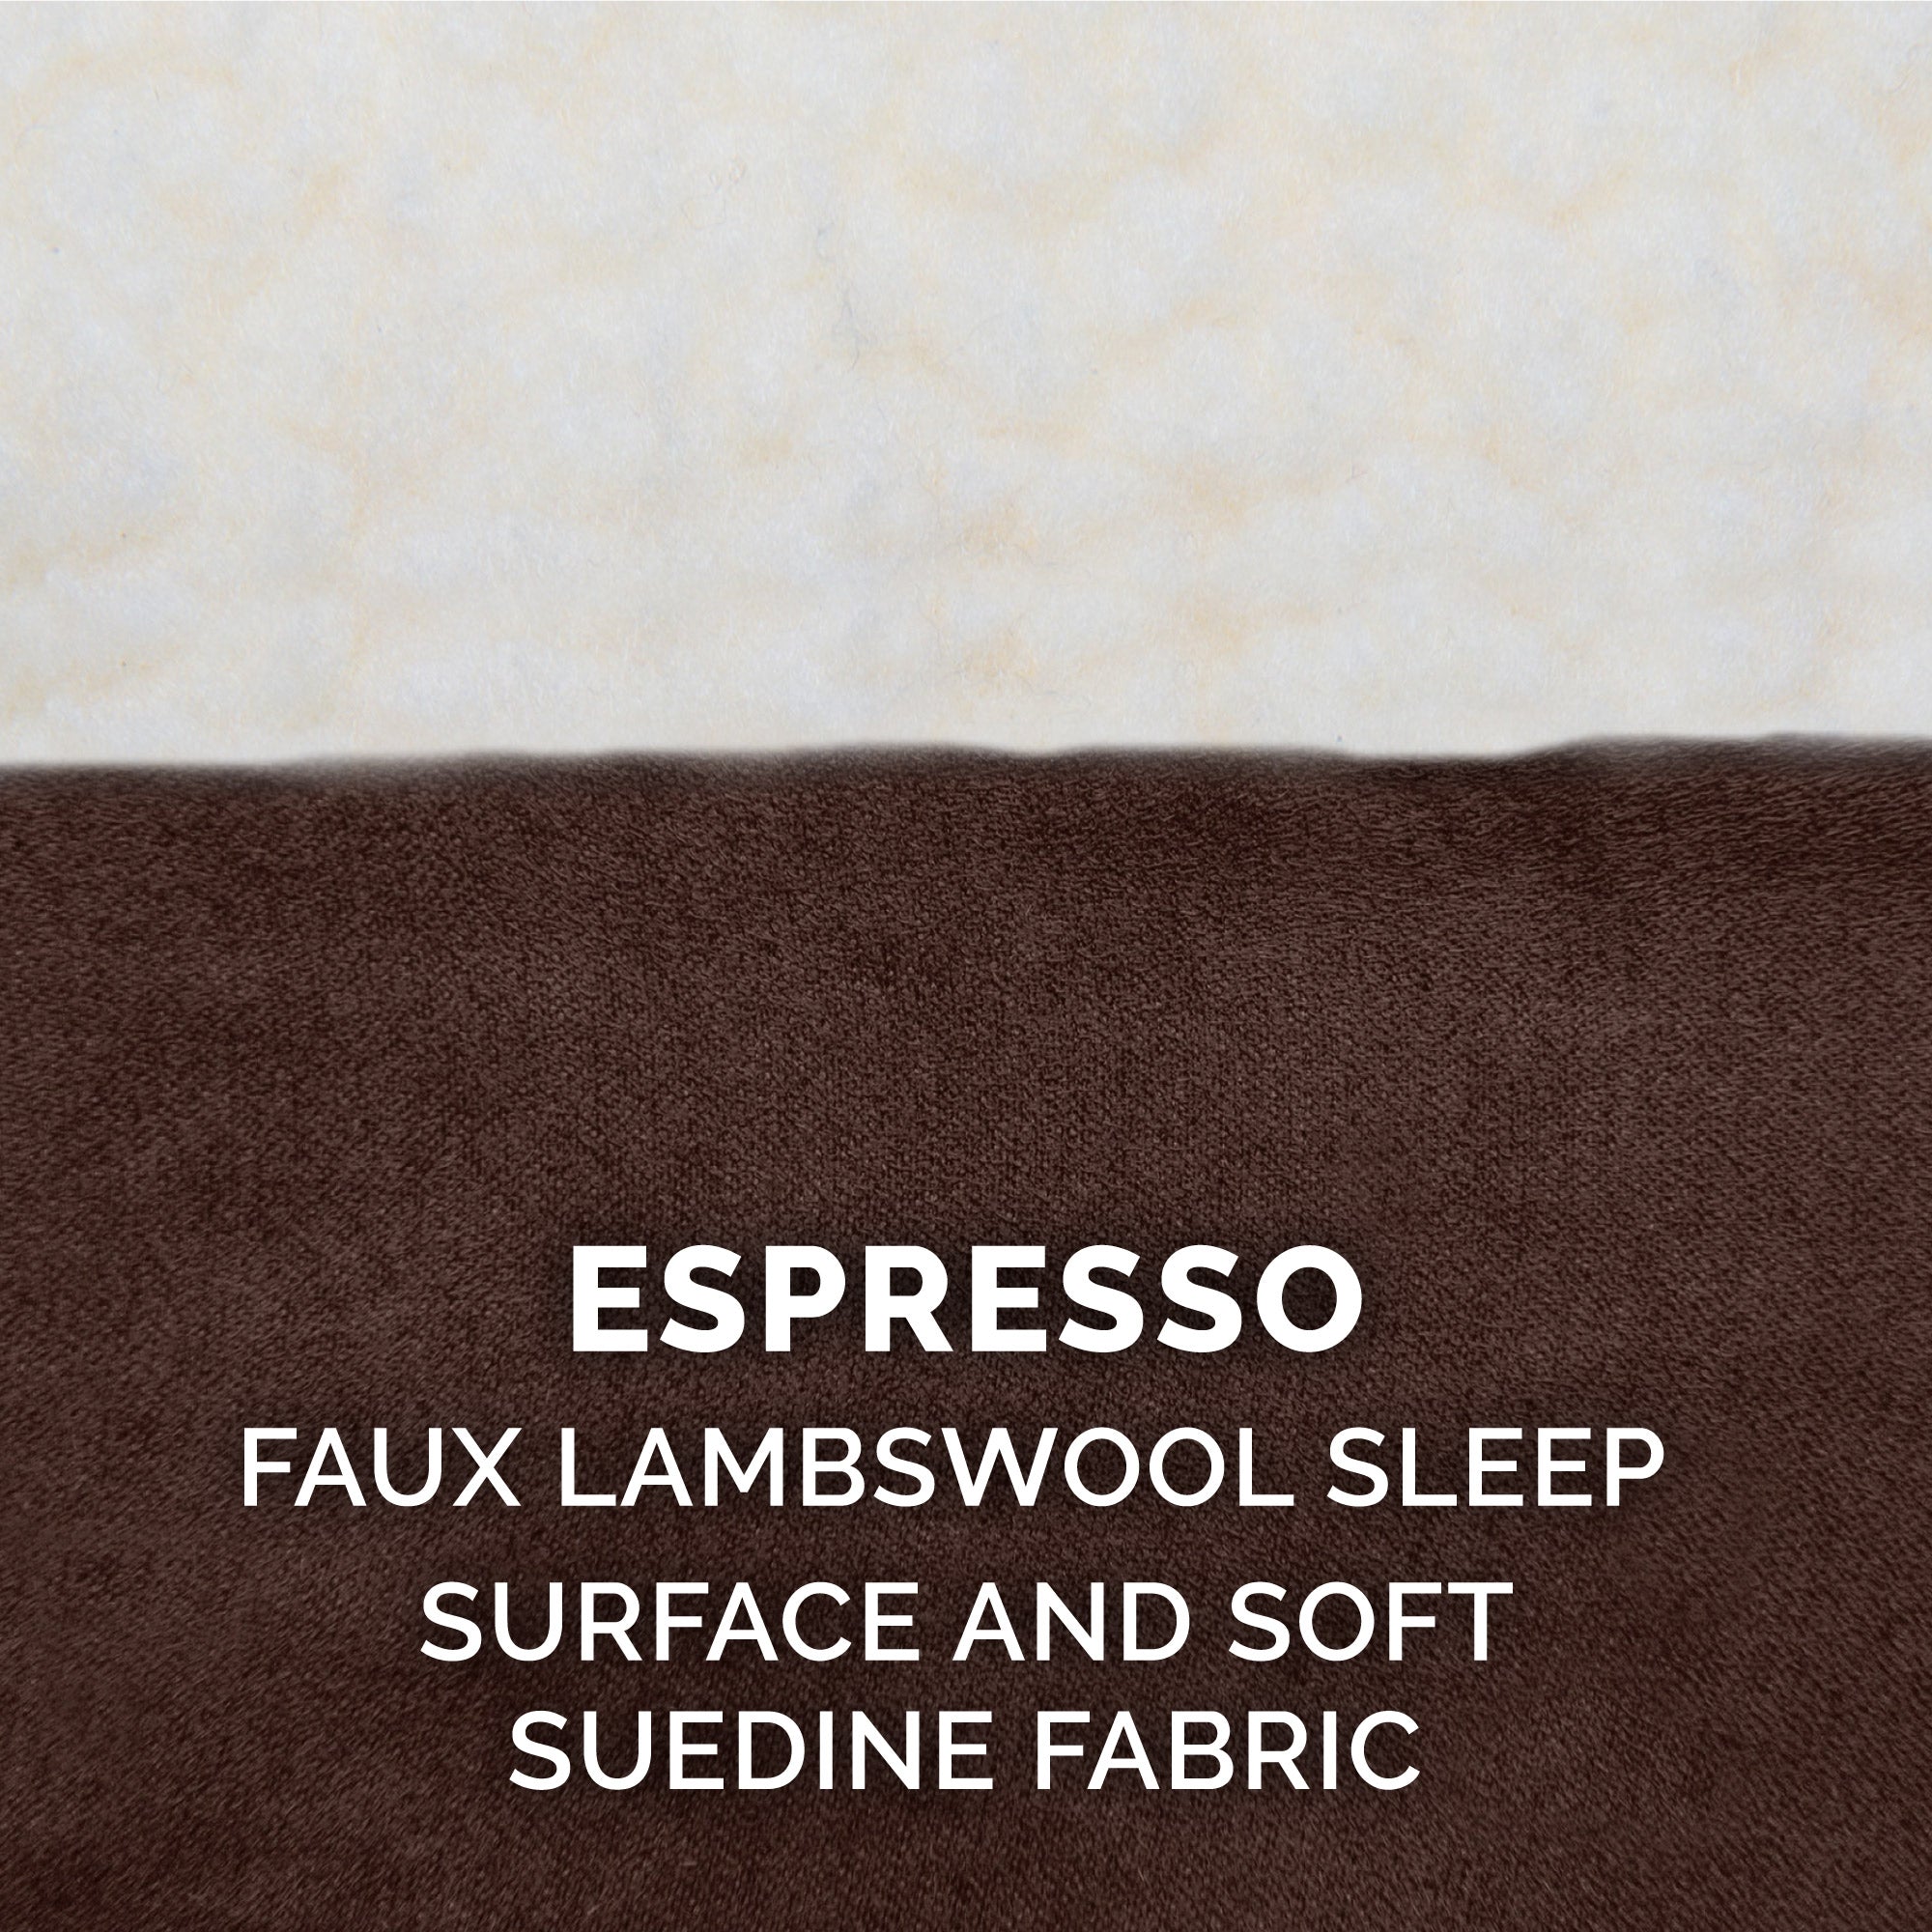 FurHaven Pet Products Faux Sheepskin and Suede Deluxe Orthopedic Dog Bed - Espresso， Large